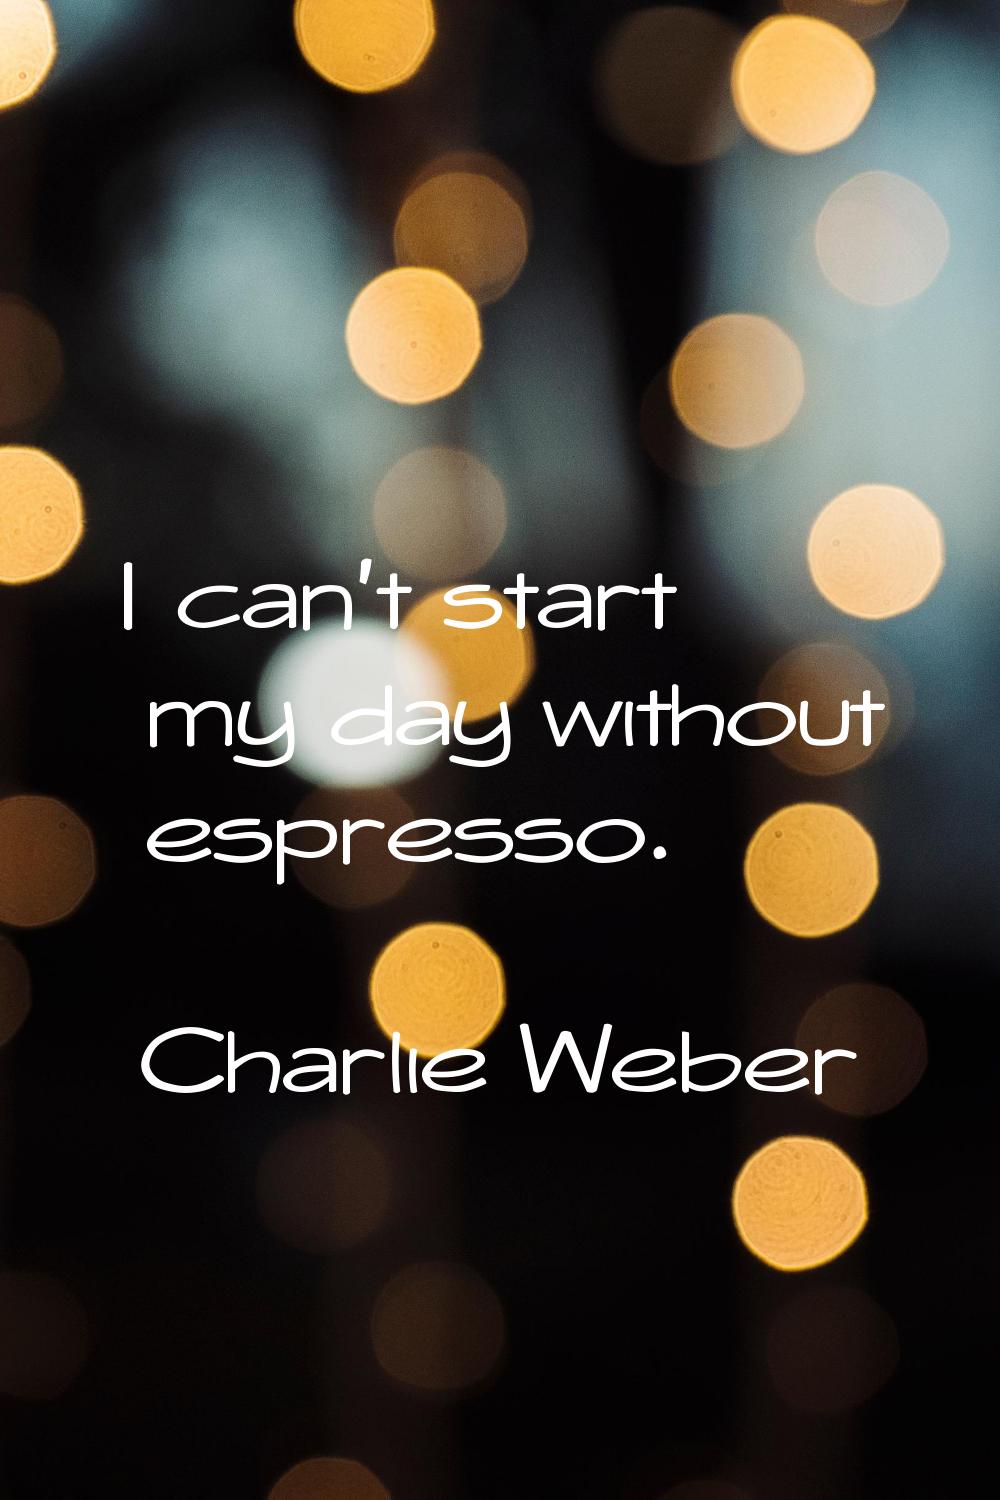 I can't start my day without espresso.